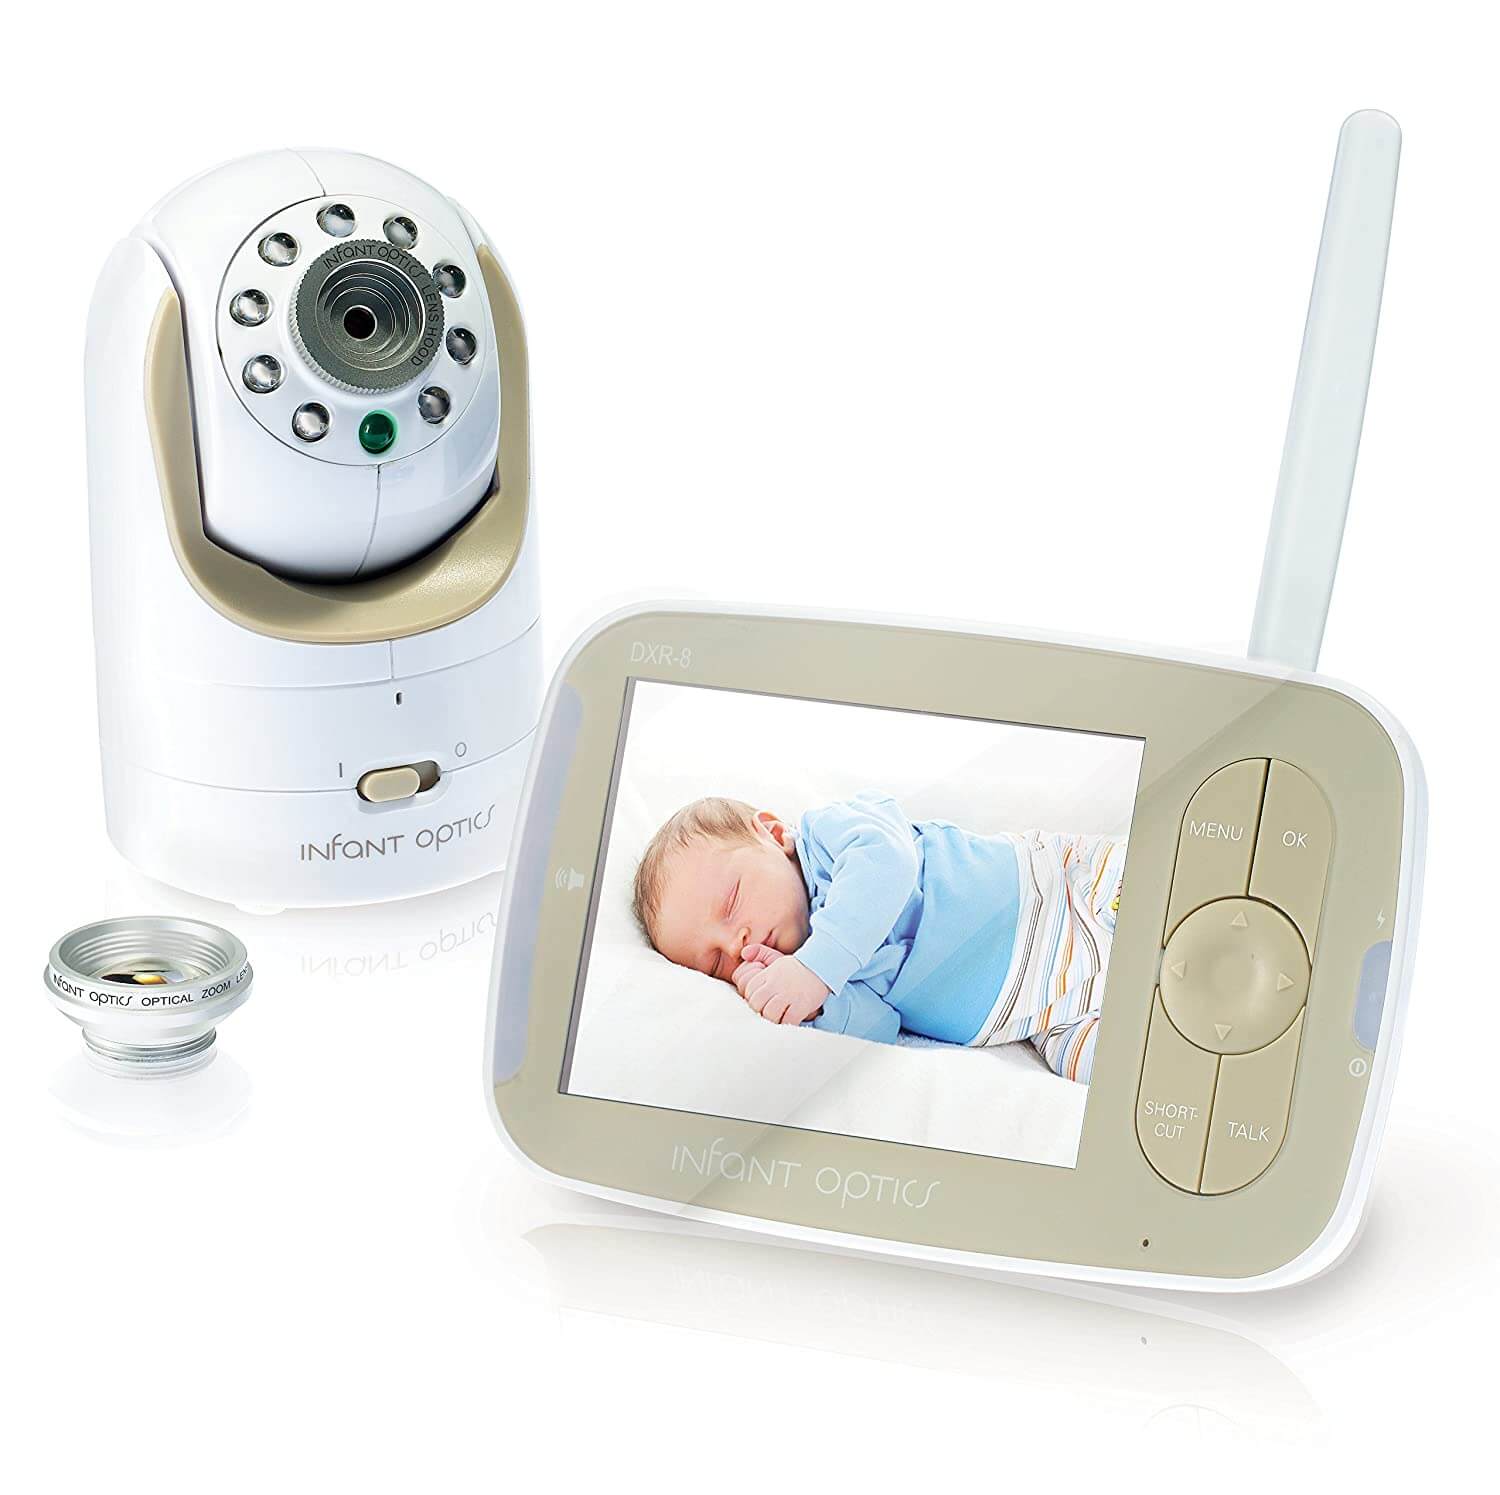 beige and white baby monitor and camera